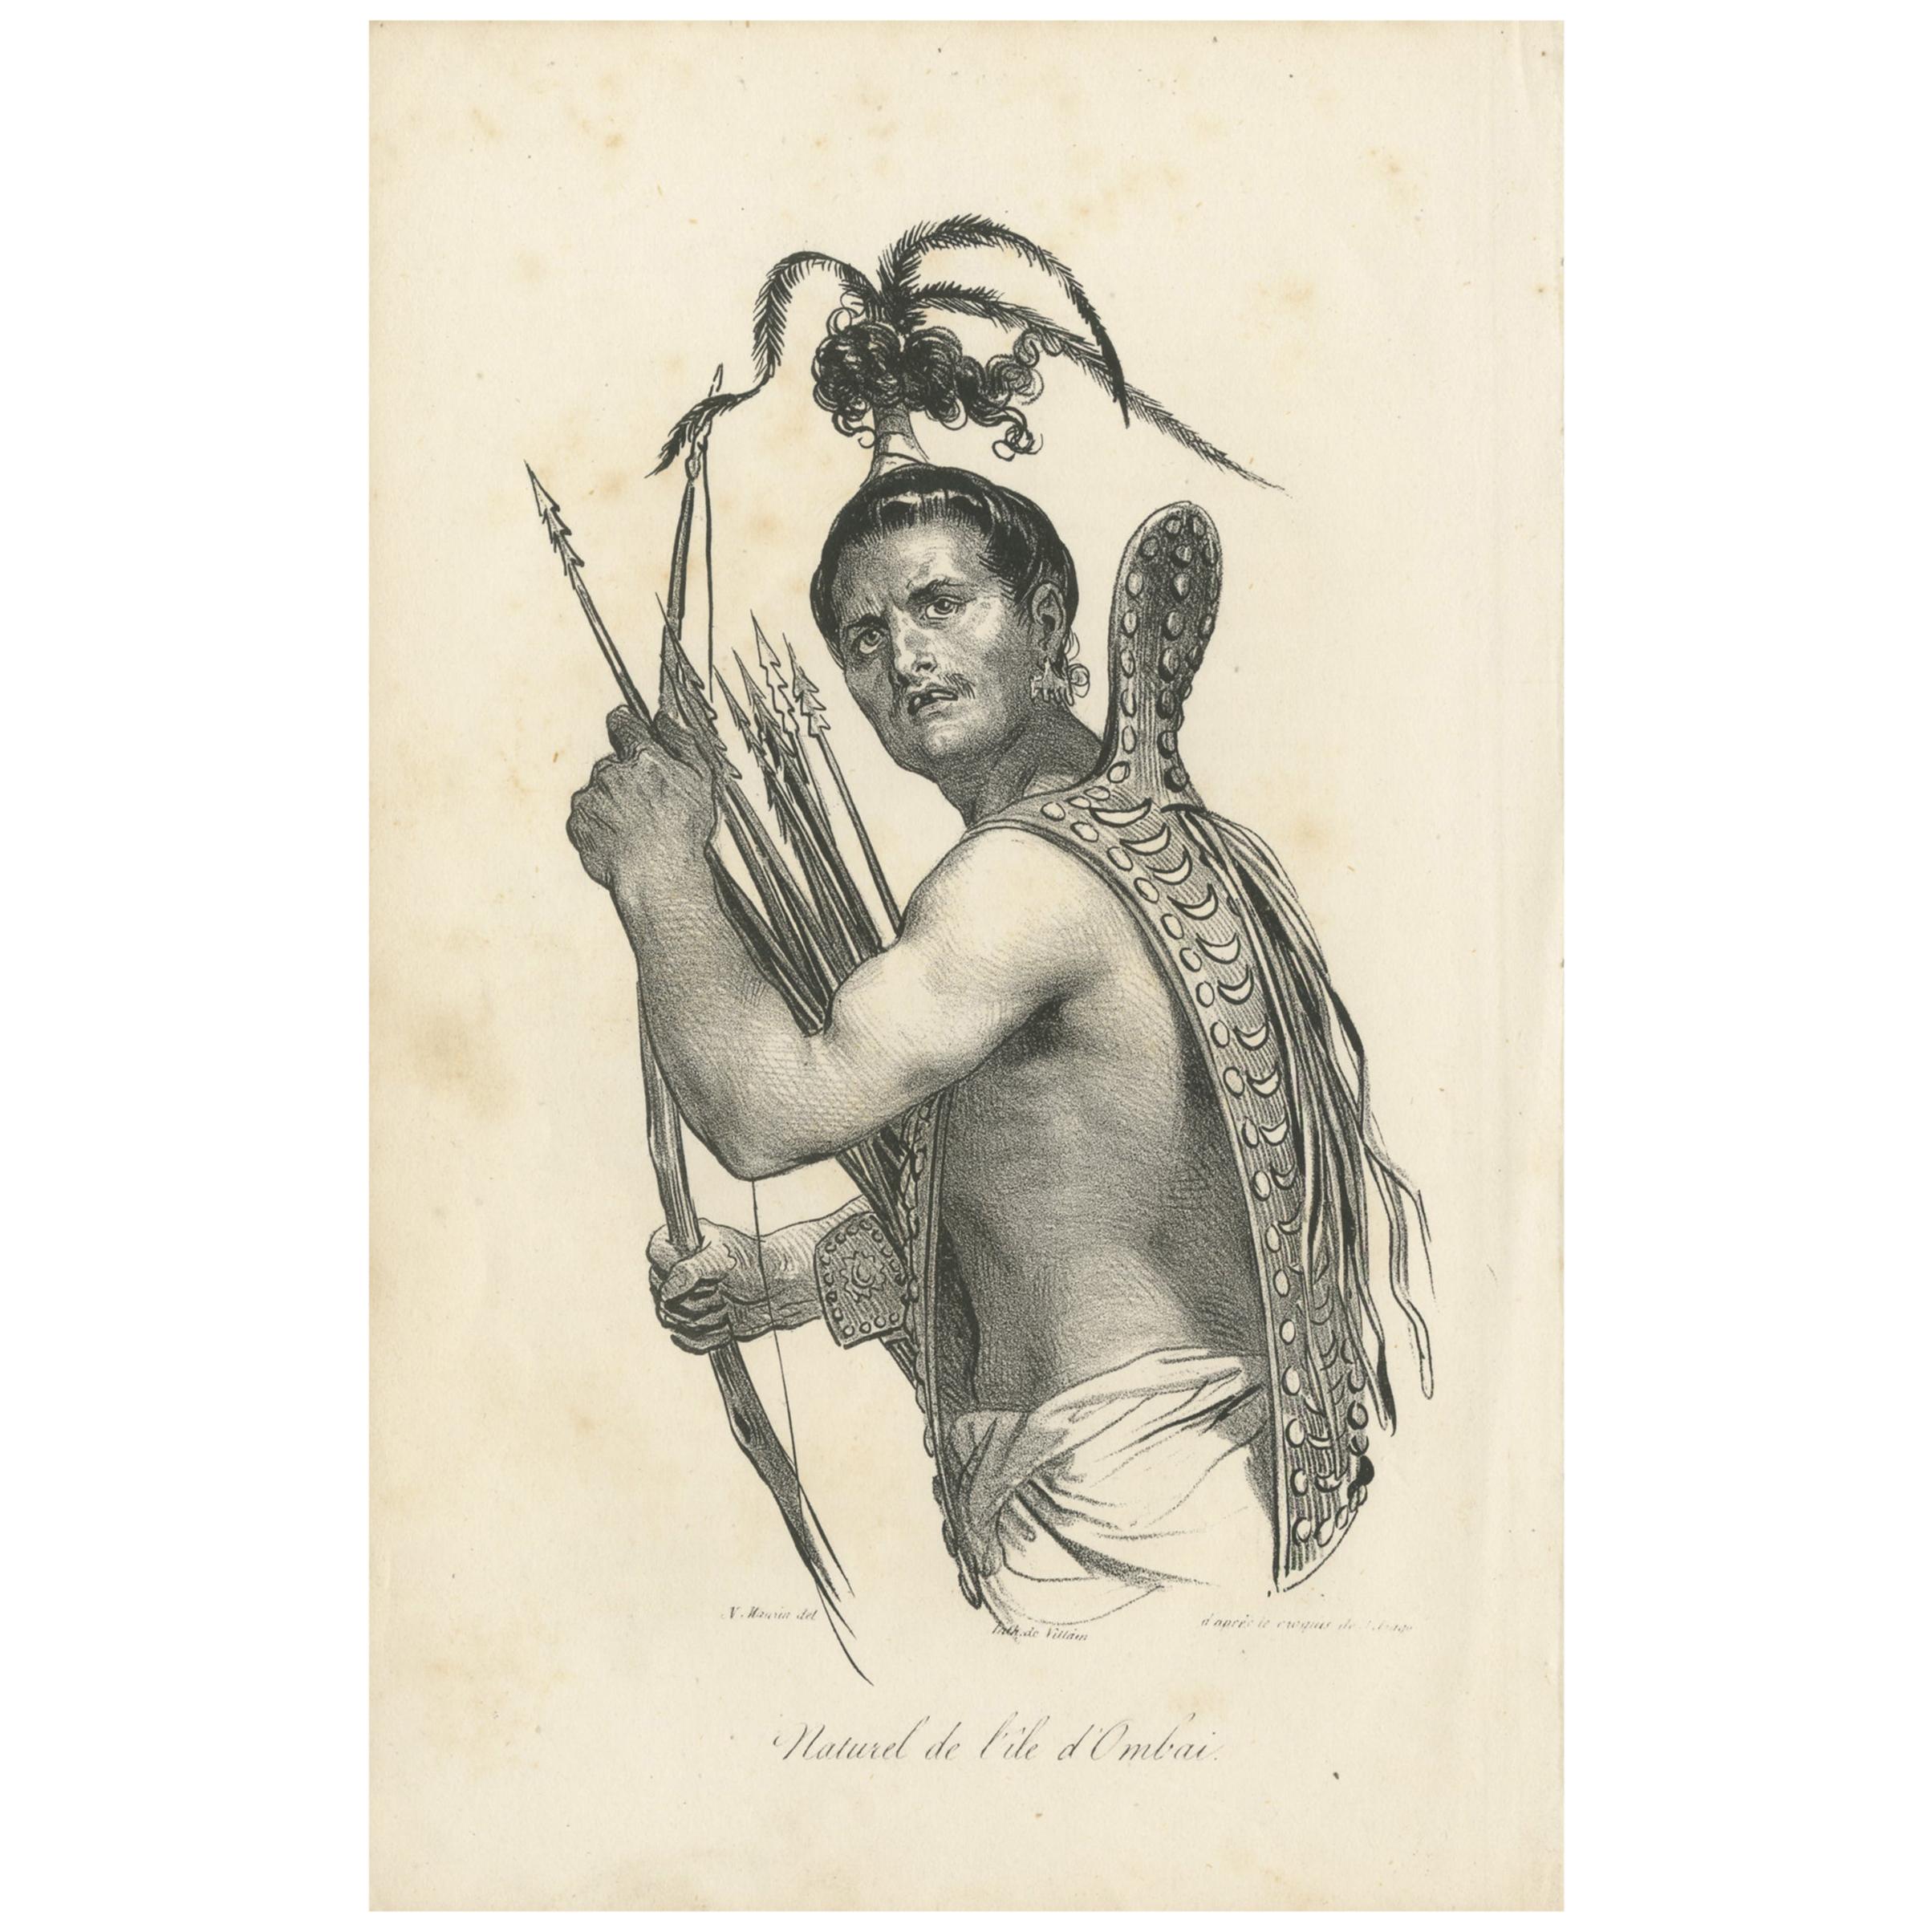 Antique Print of a native of the Ombai Strait, 'circa 1840'